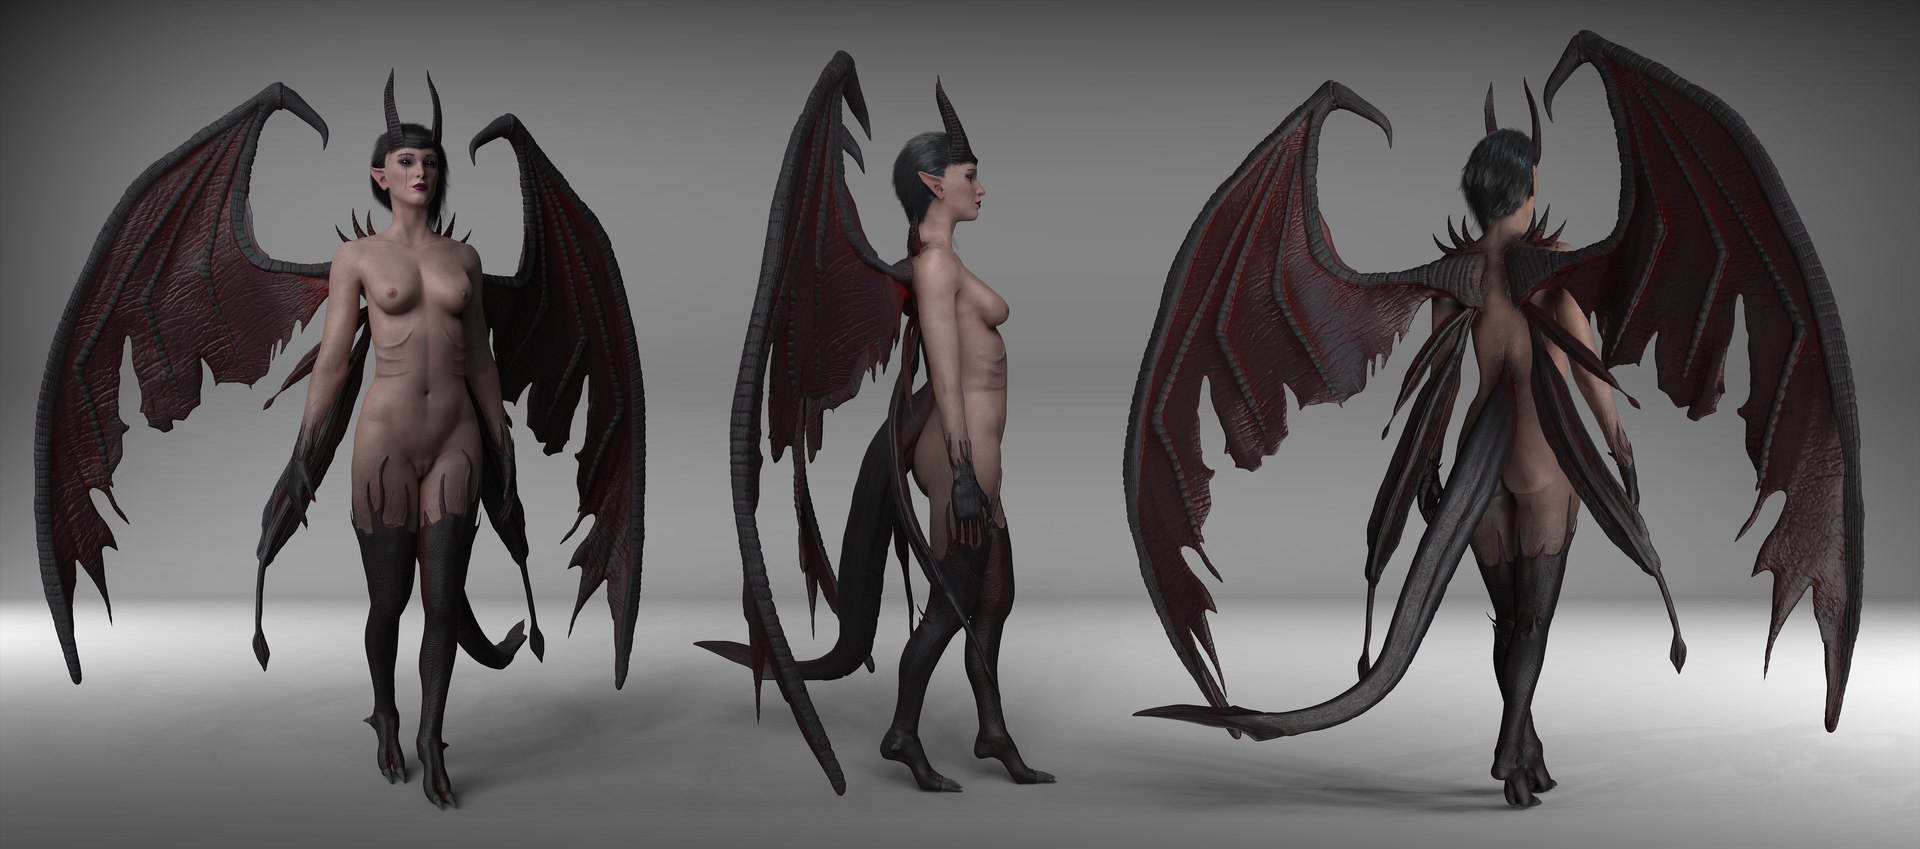 Winged Demon 3d Porn Animation Girls - 3D succubus character - TurboSquid 1614612